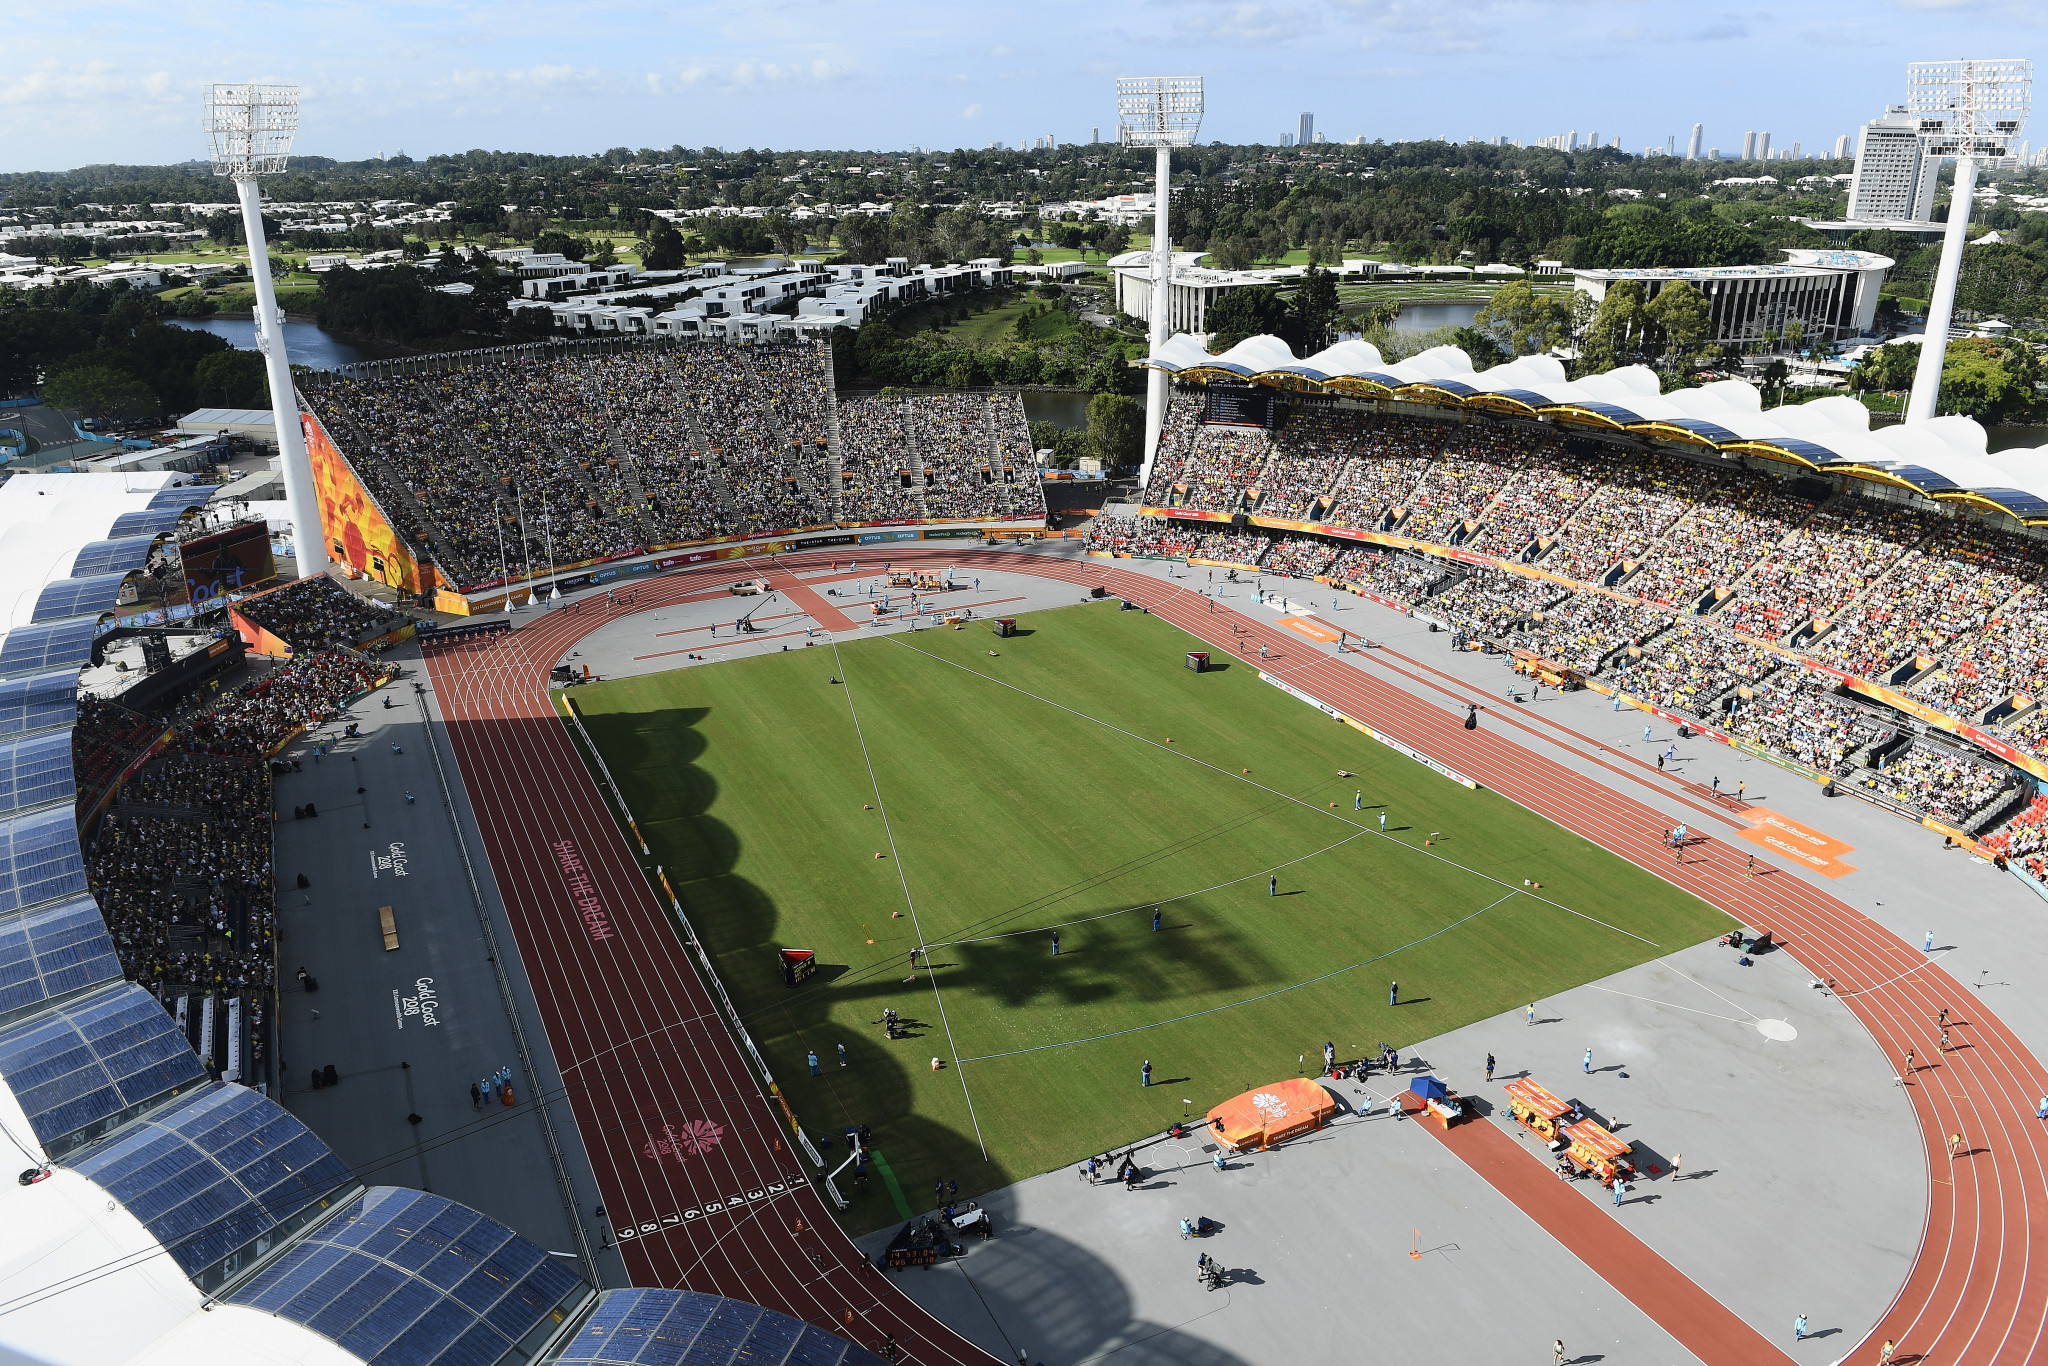 The Carrara Stadium hosted athletics, as well as the Opening and Closing Ceremonies, during the 2018 Commonwealth Games in the Gold Coast ©Getty Images